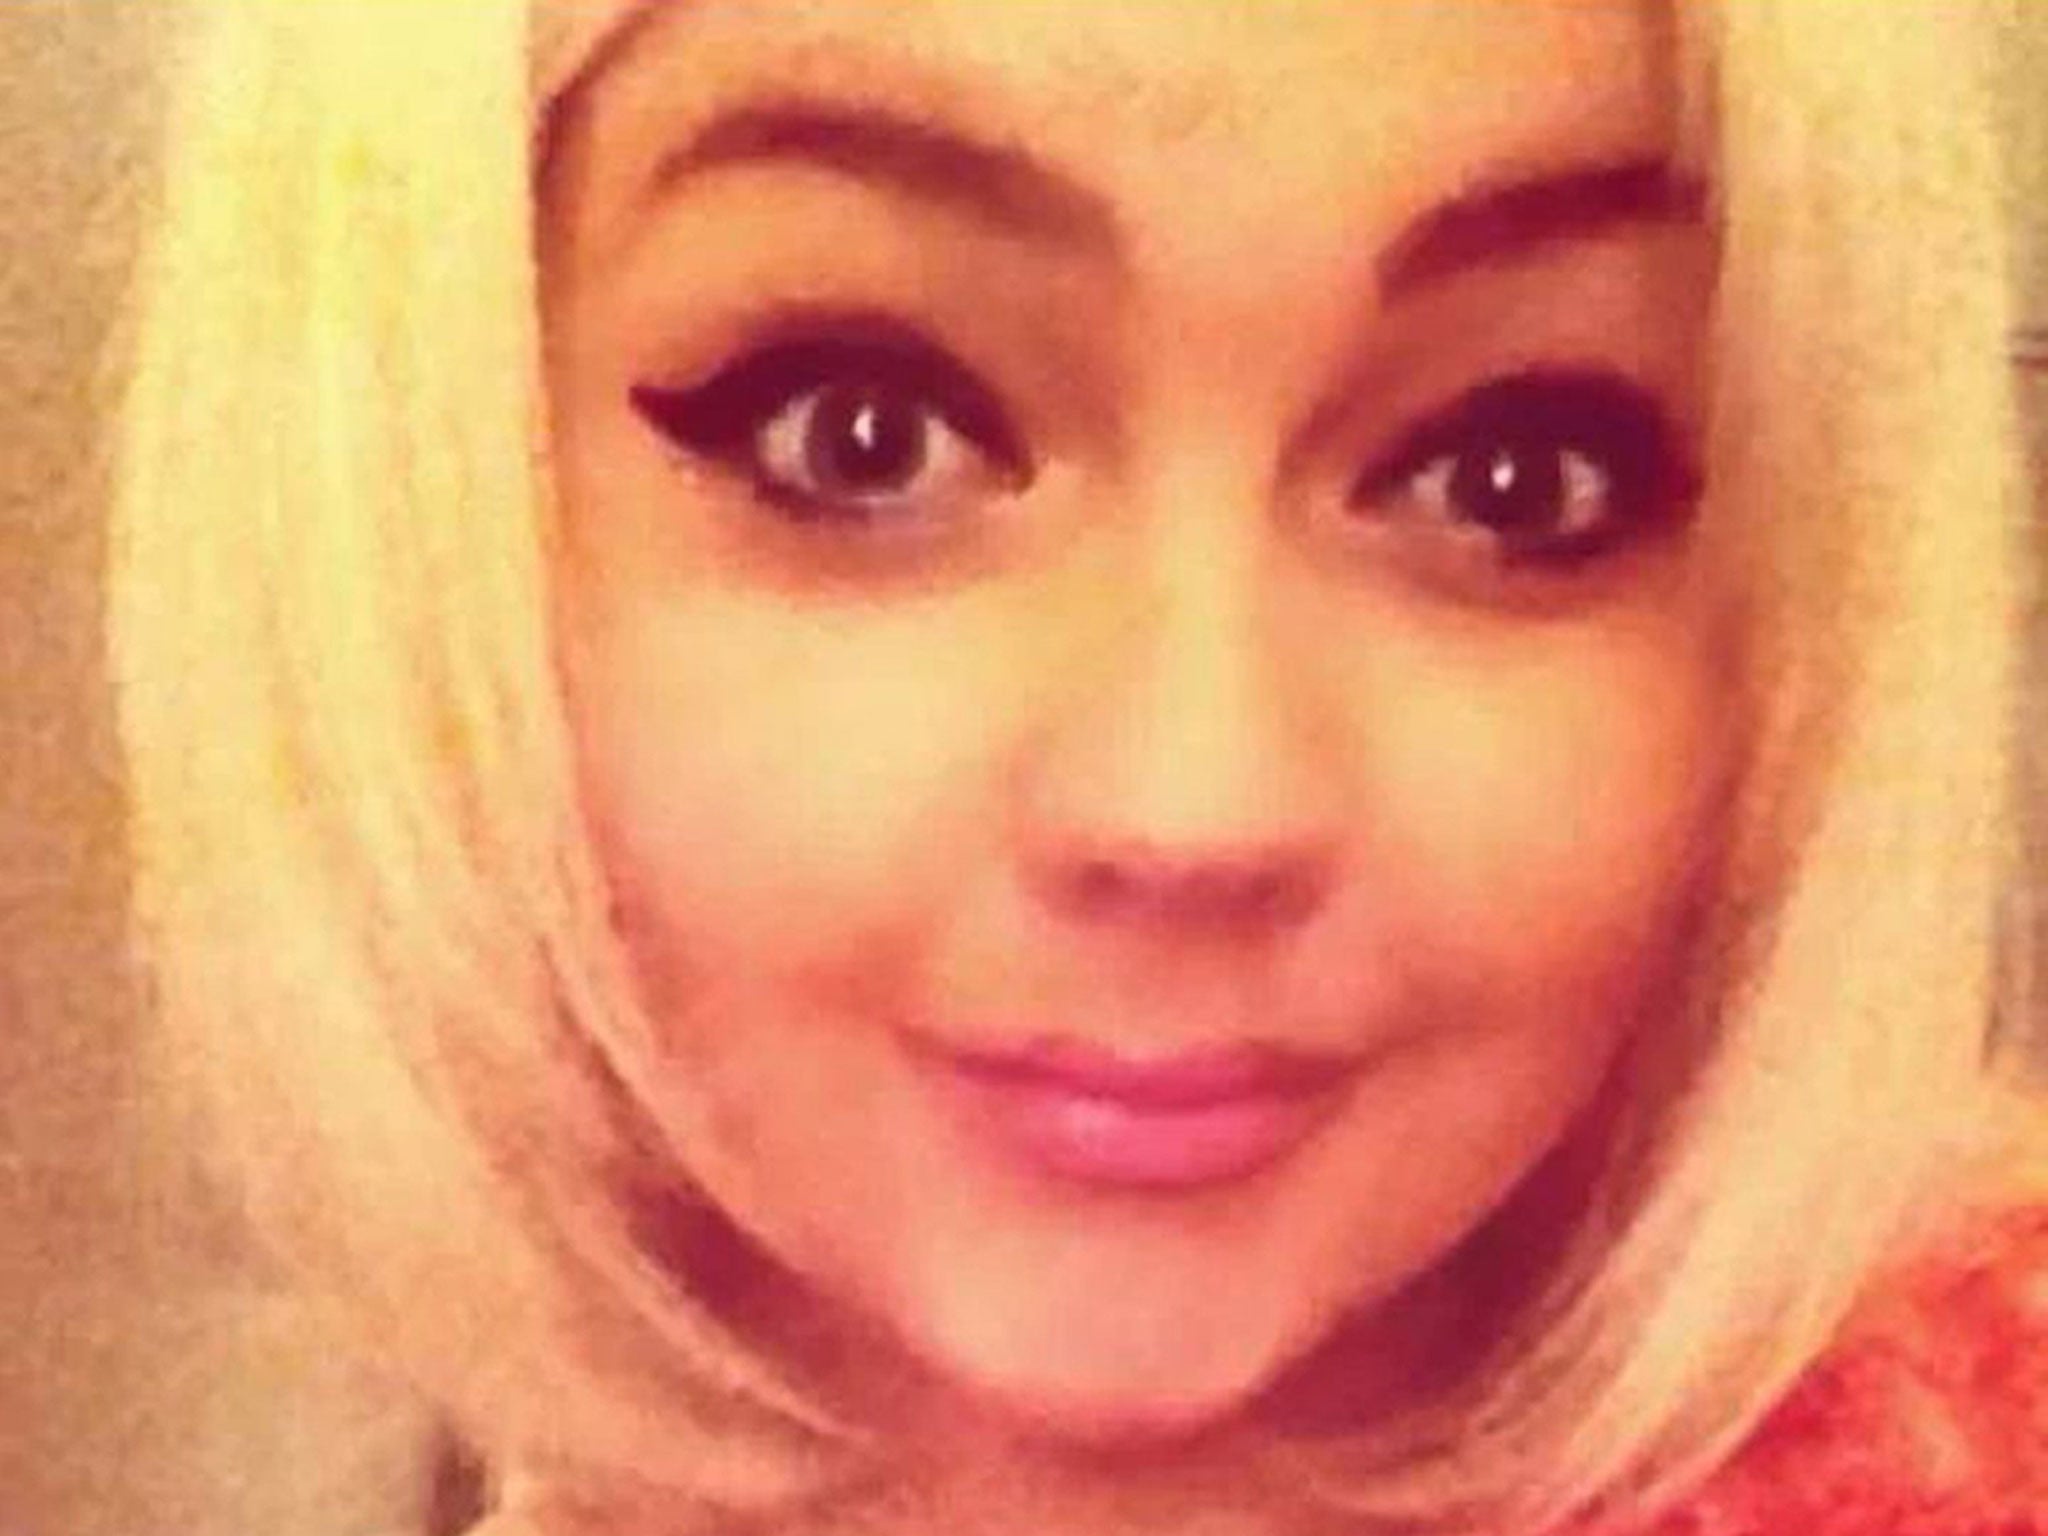 Regane MacColl, 17, from Clydebank, reportedly took the drug at The Arches nightclub in central Glasgow on Saturday, she died the next day.